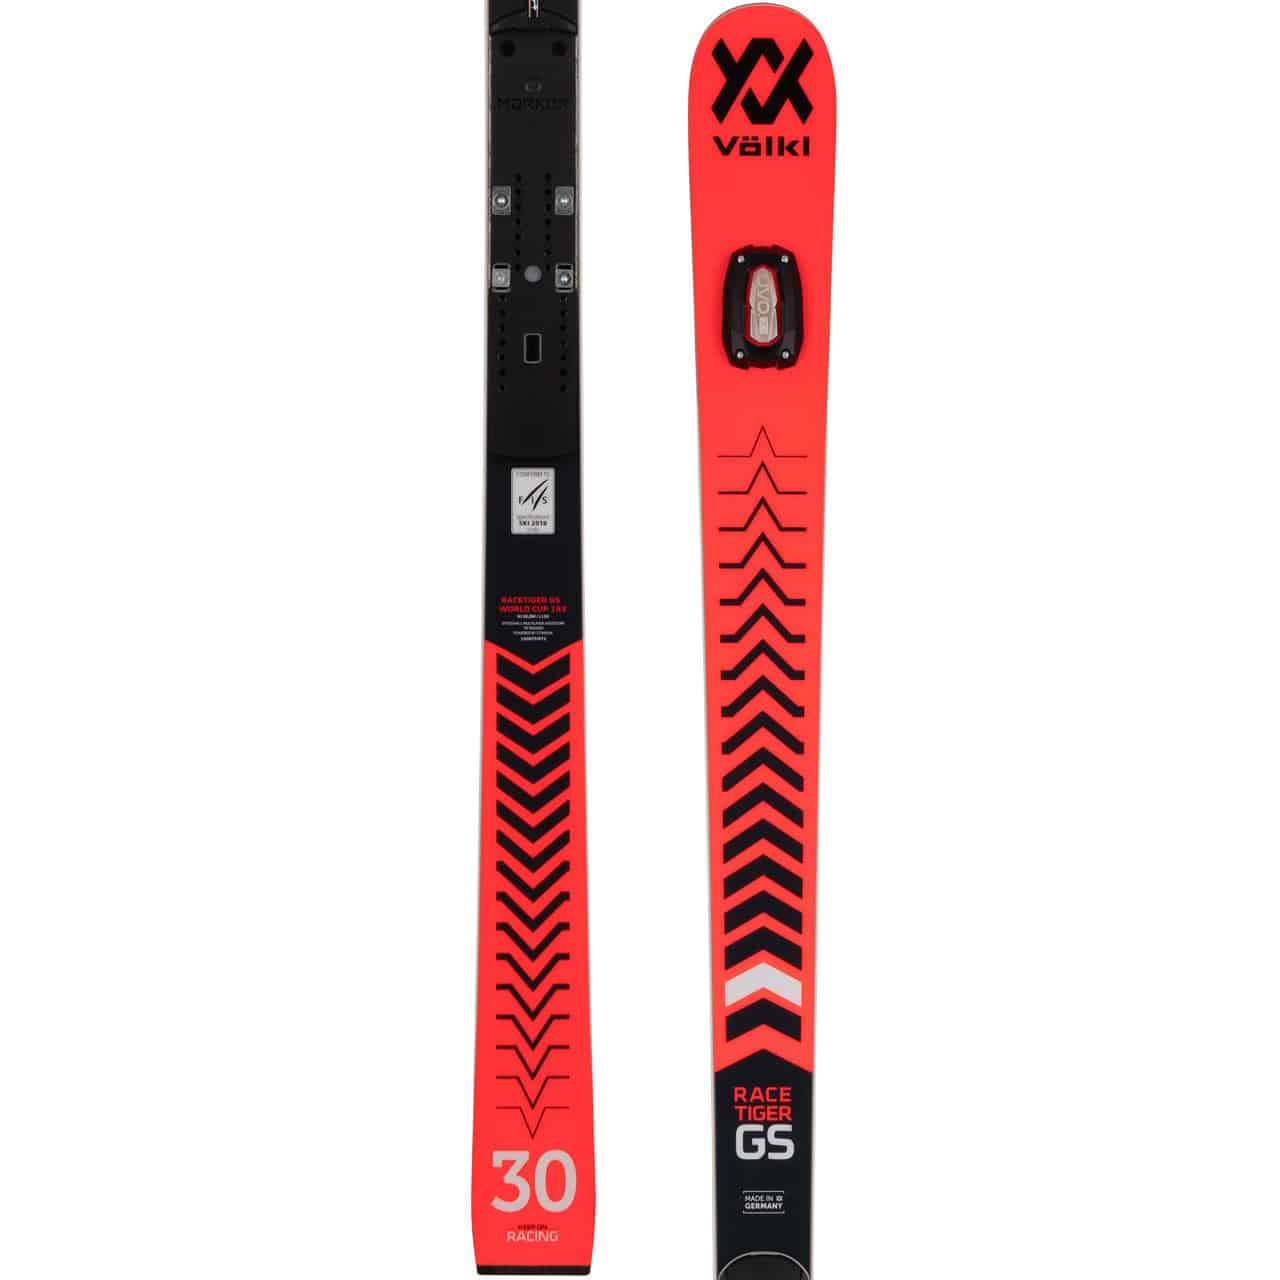 RaceXcell 16 Binding 2020 Volkl Racetiger GS Pro Skis 